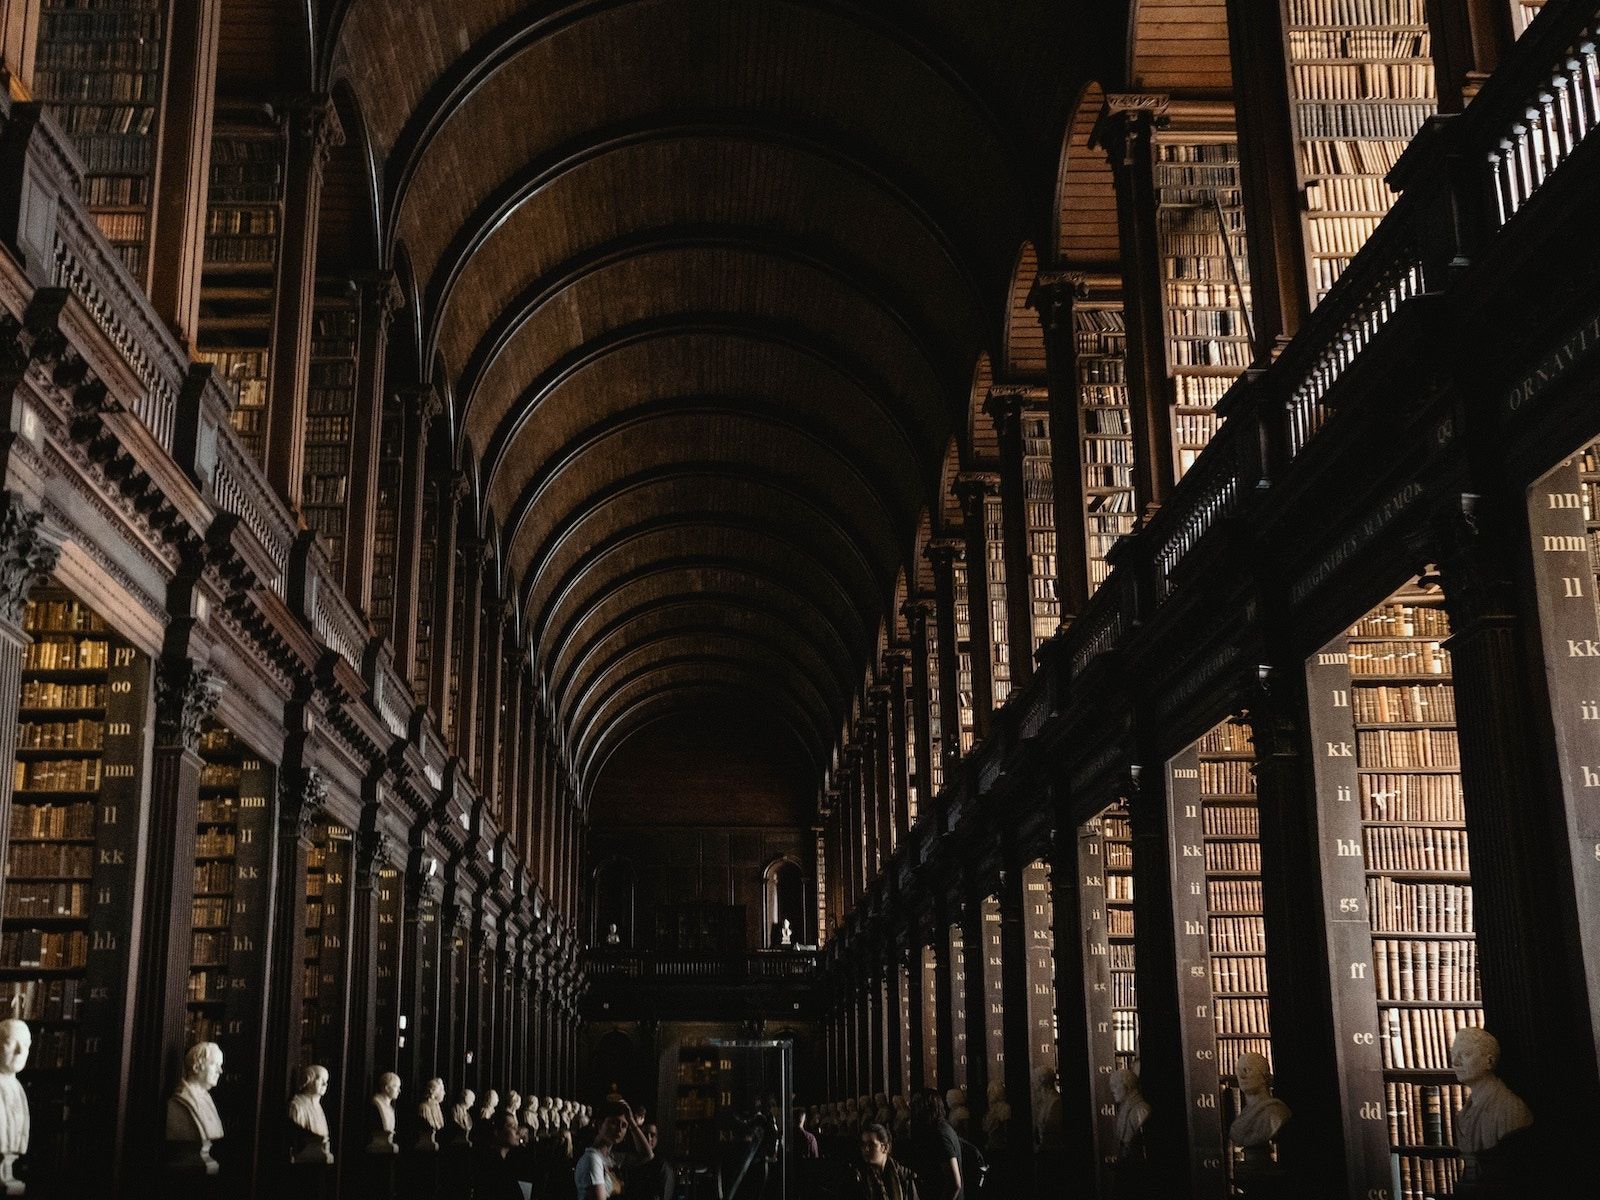 A large library with many books and people - Dark academia